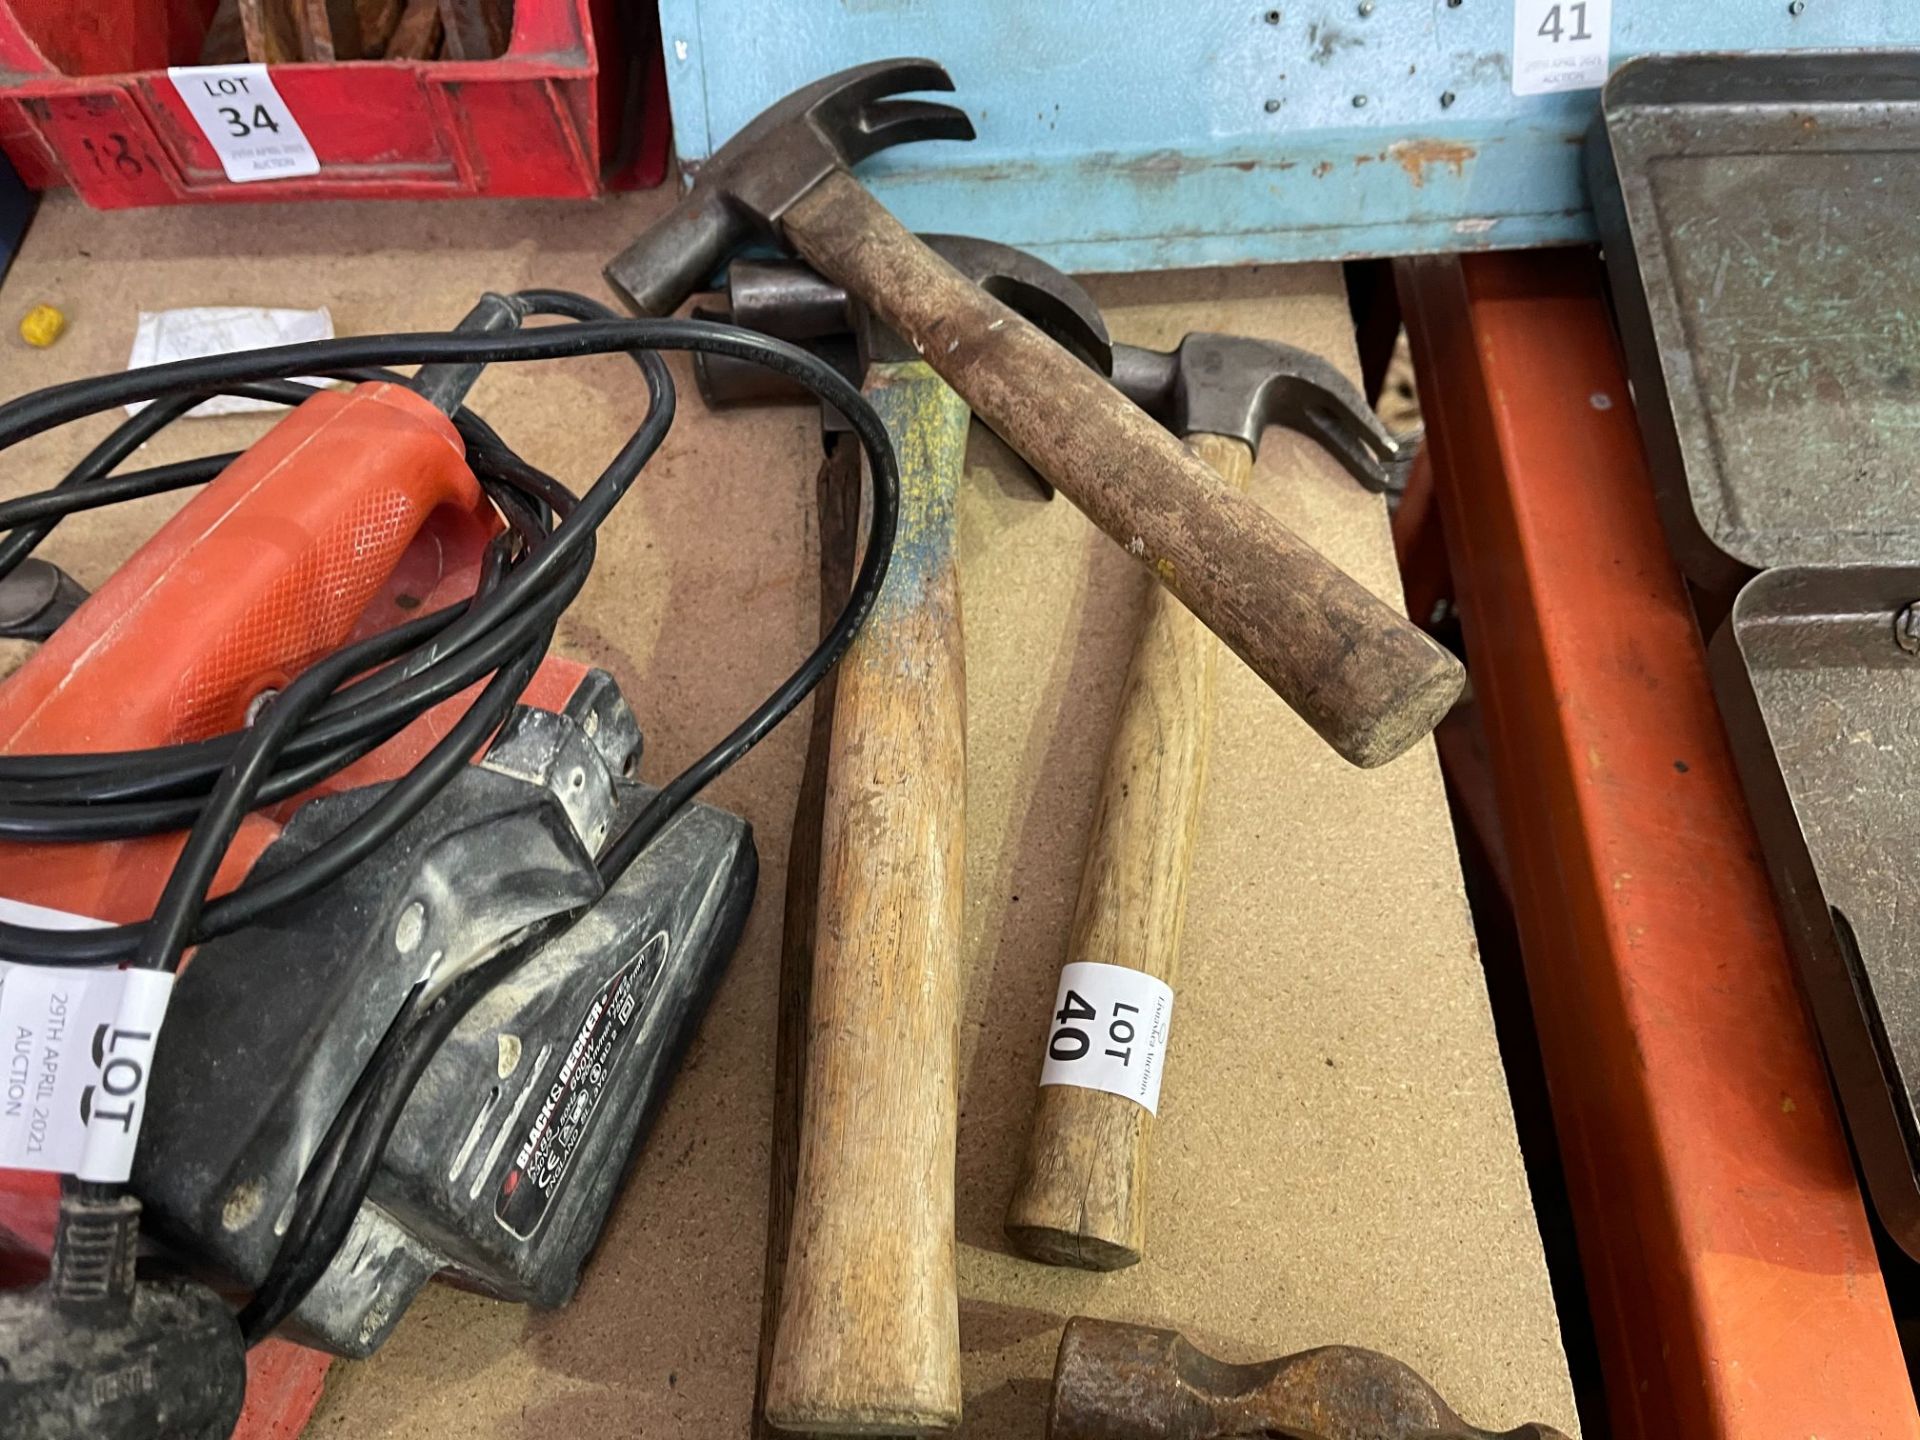 LOT OF 4 CLAW HAMMERS